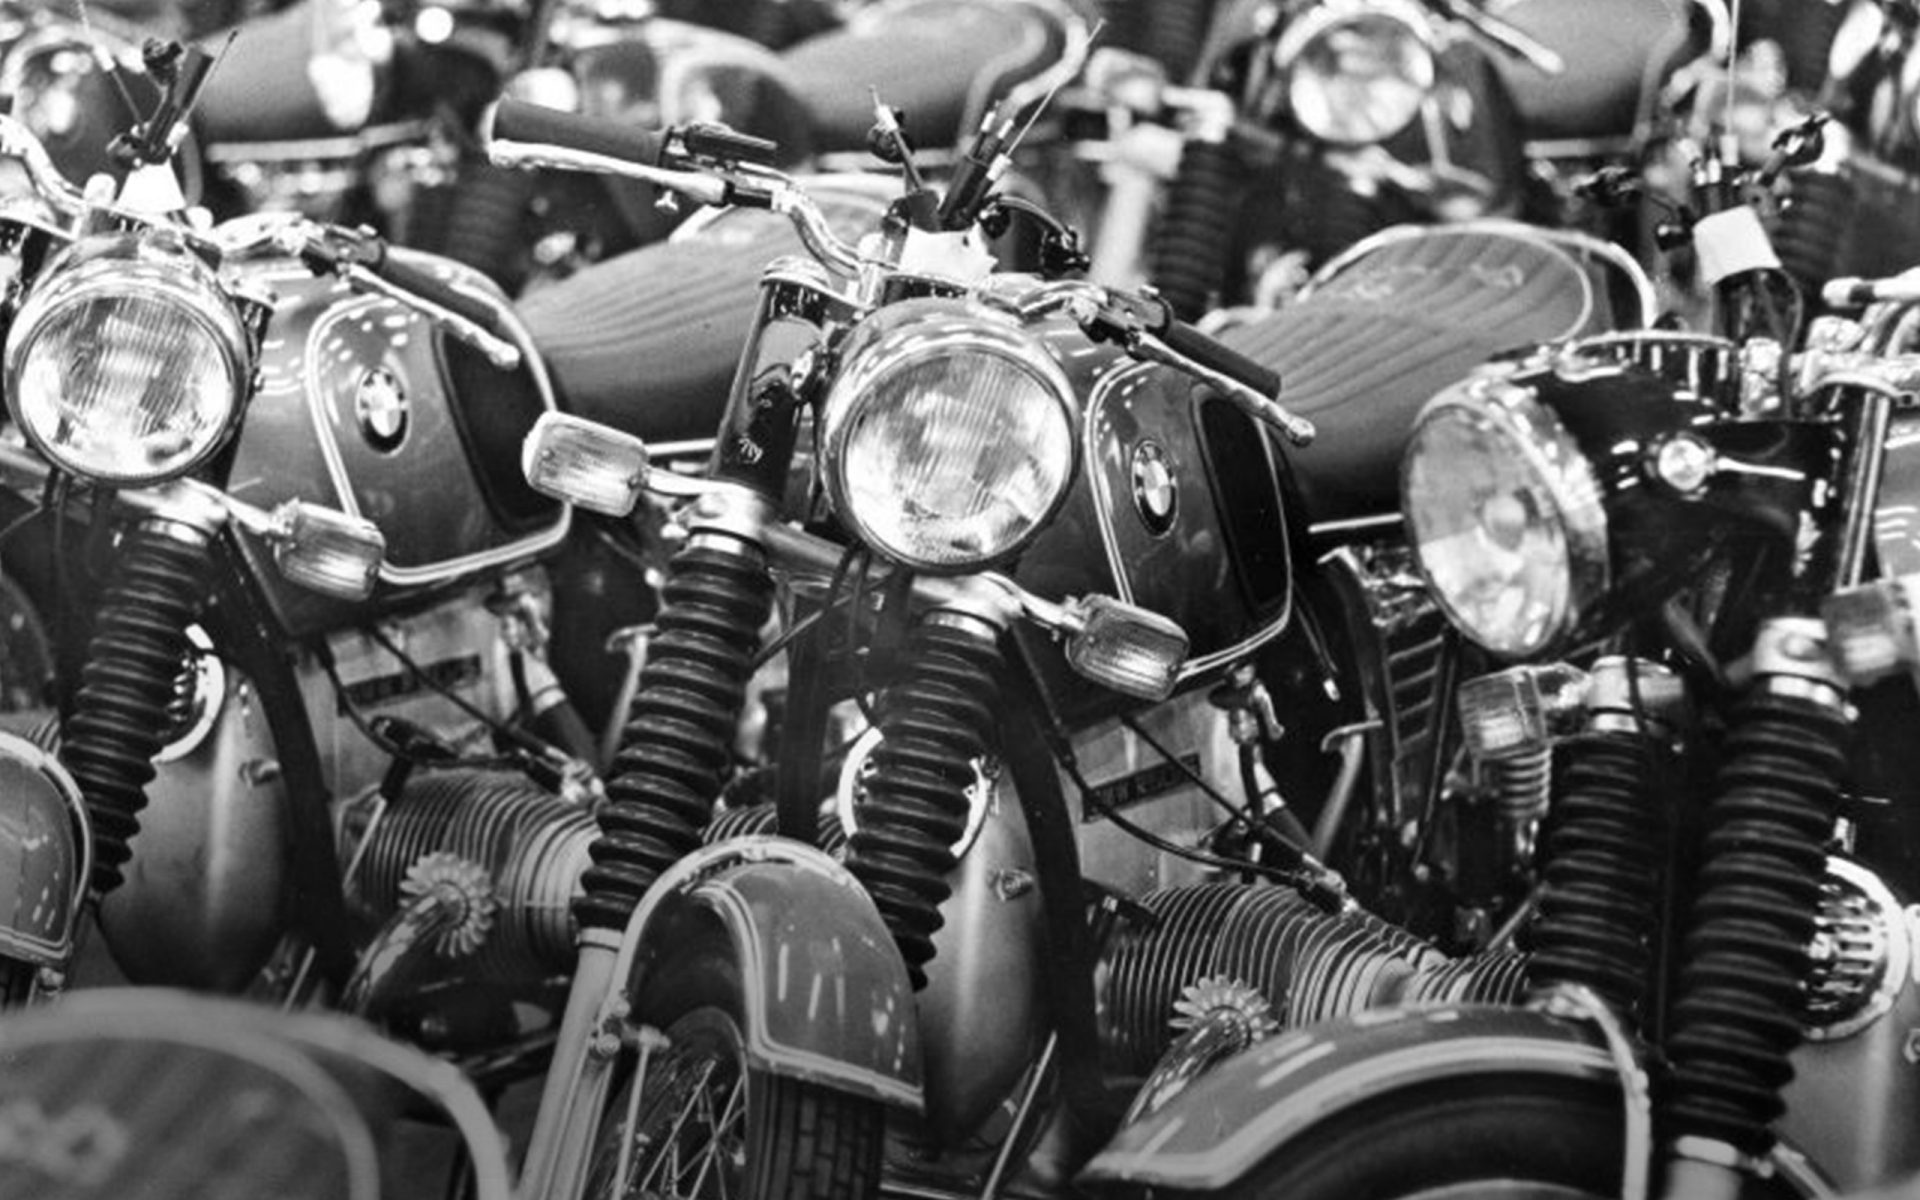 Production of BMW motorcycles moves to Berlin.